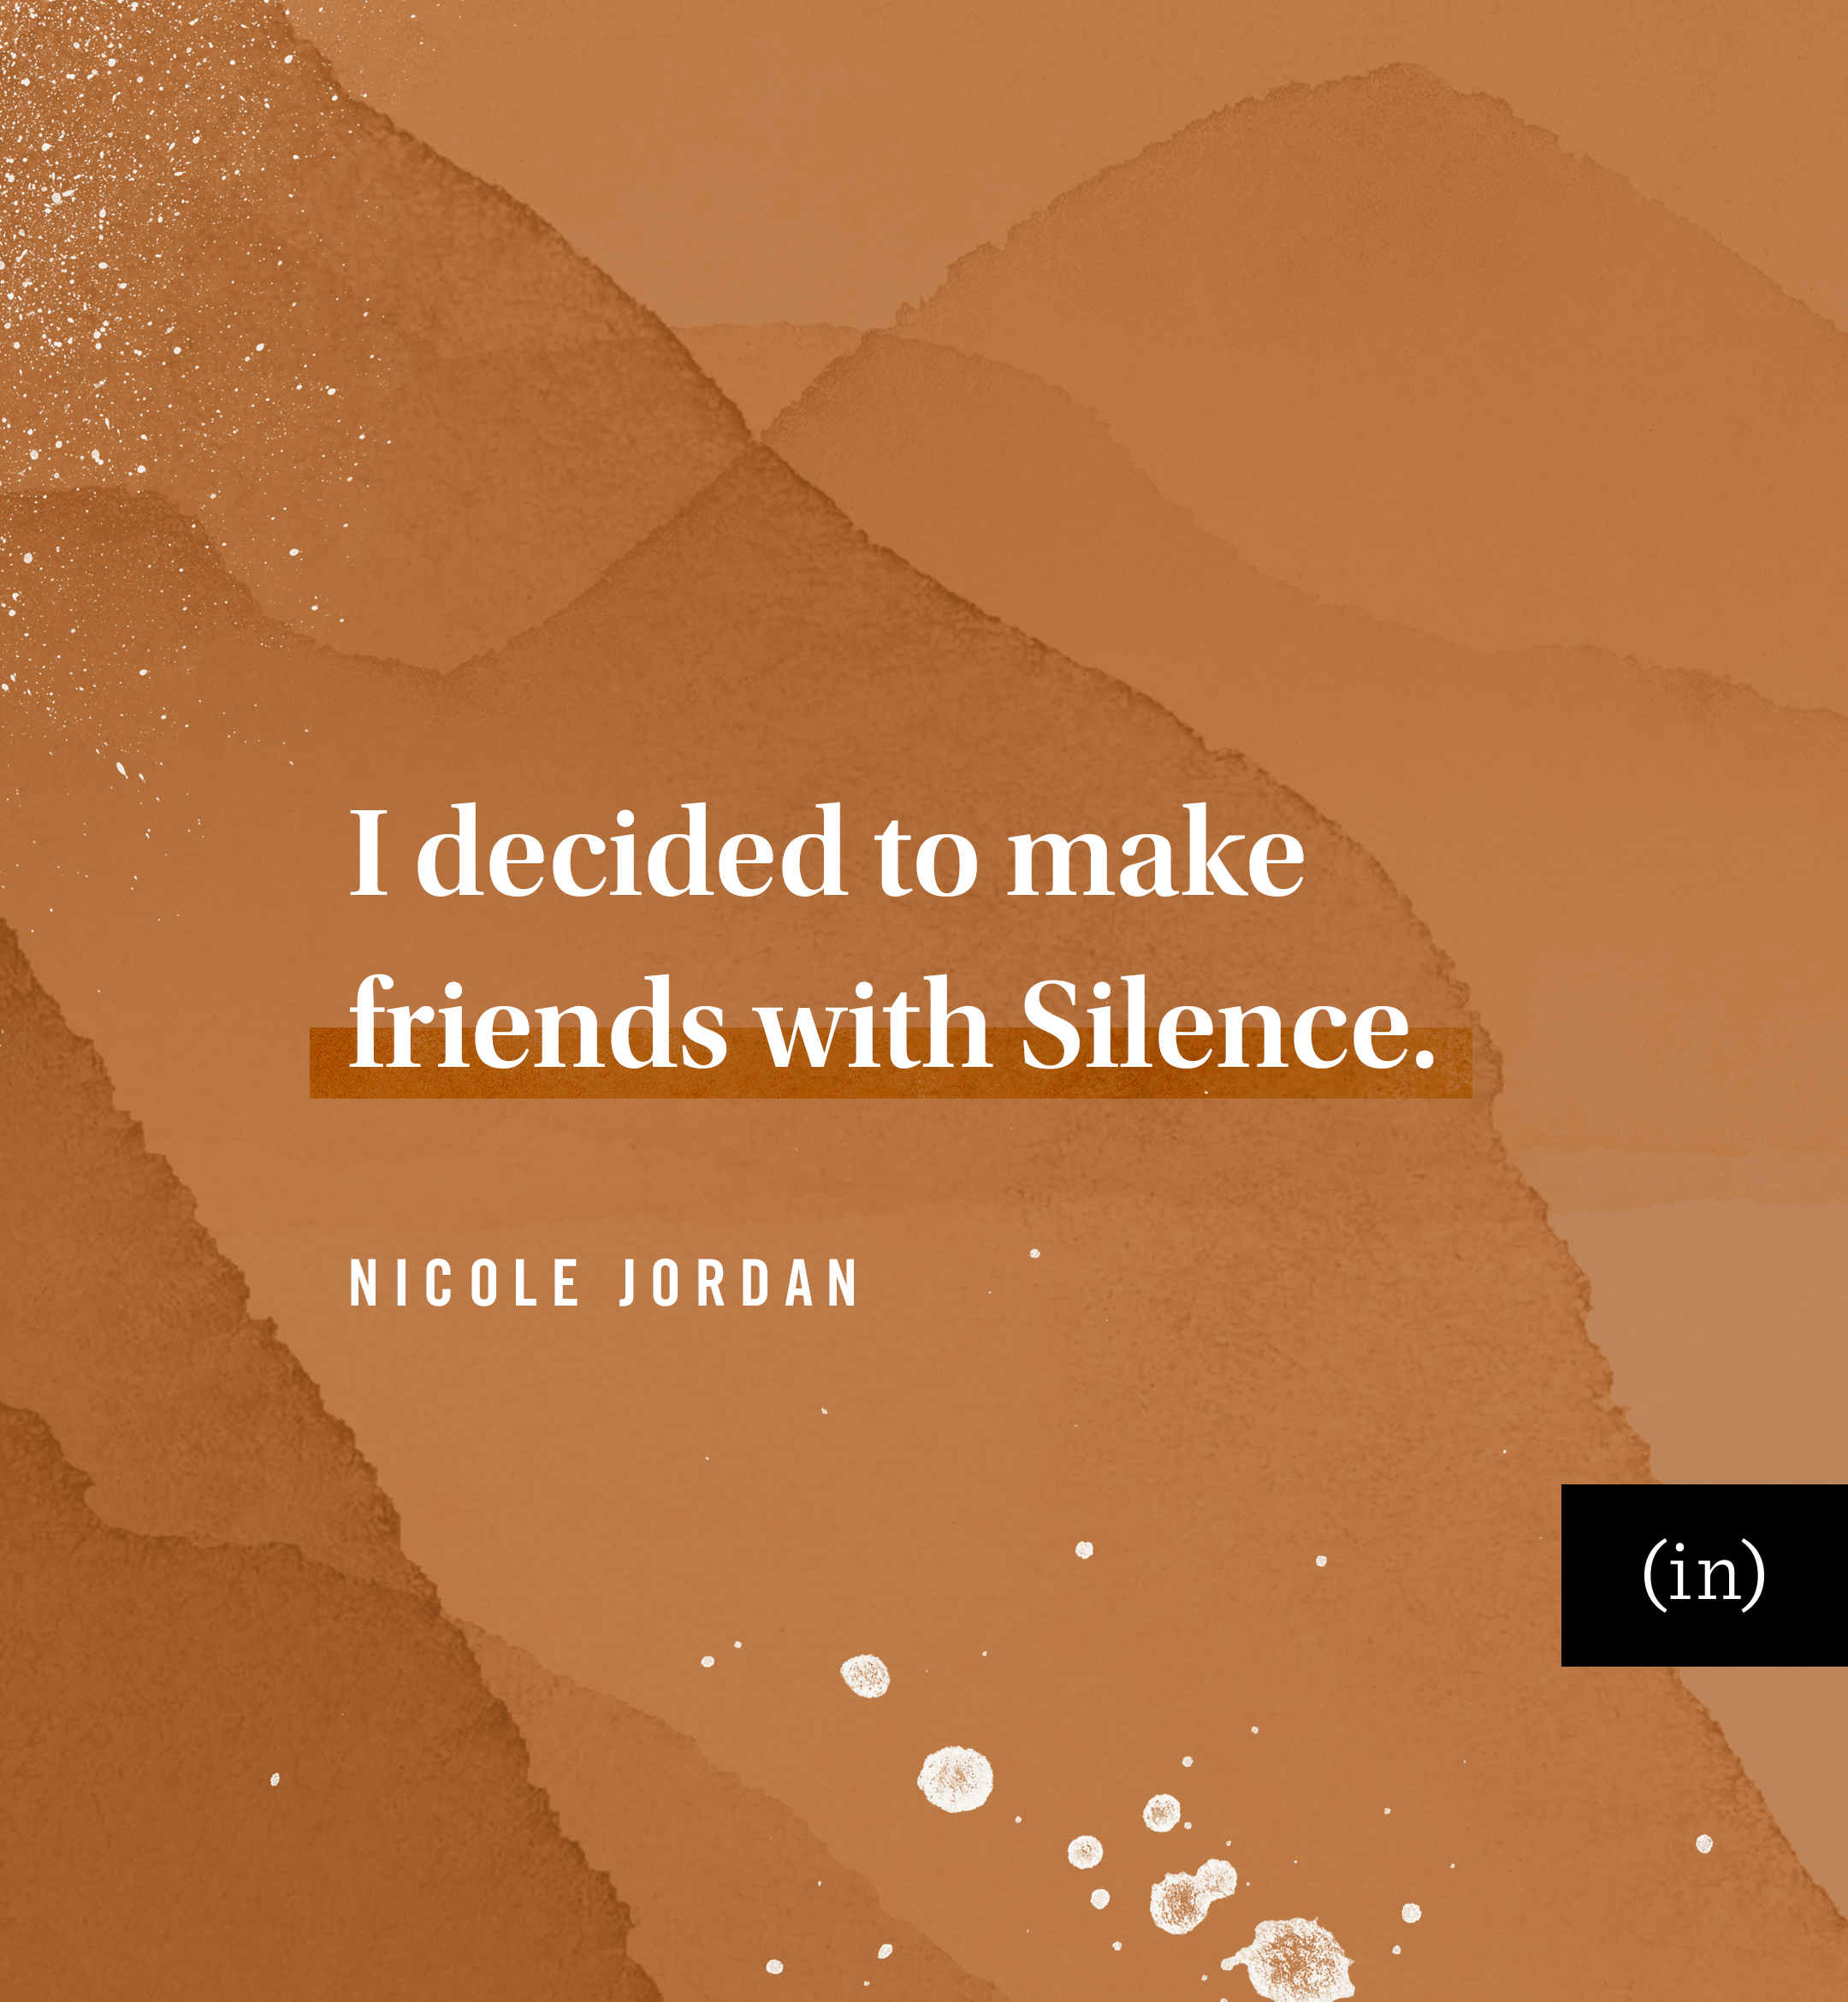 I decided to make friends with Silence. -Nicole Jordan